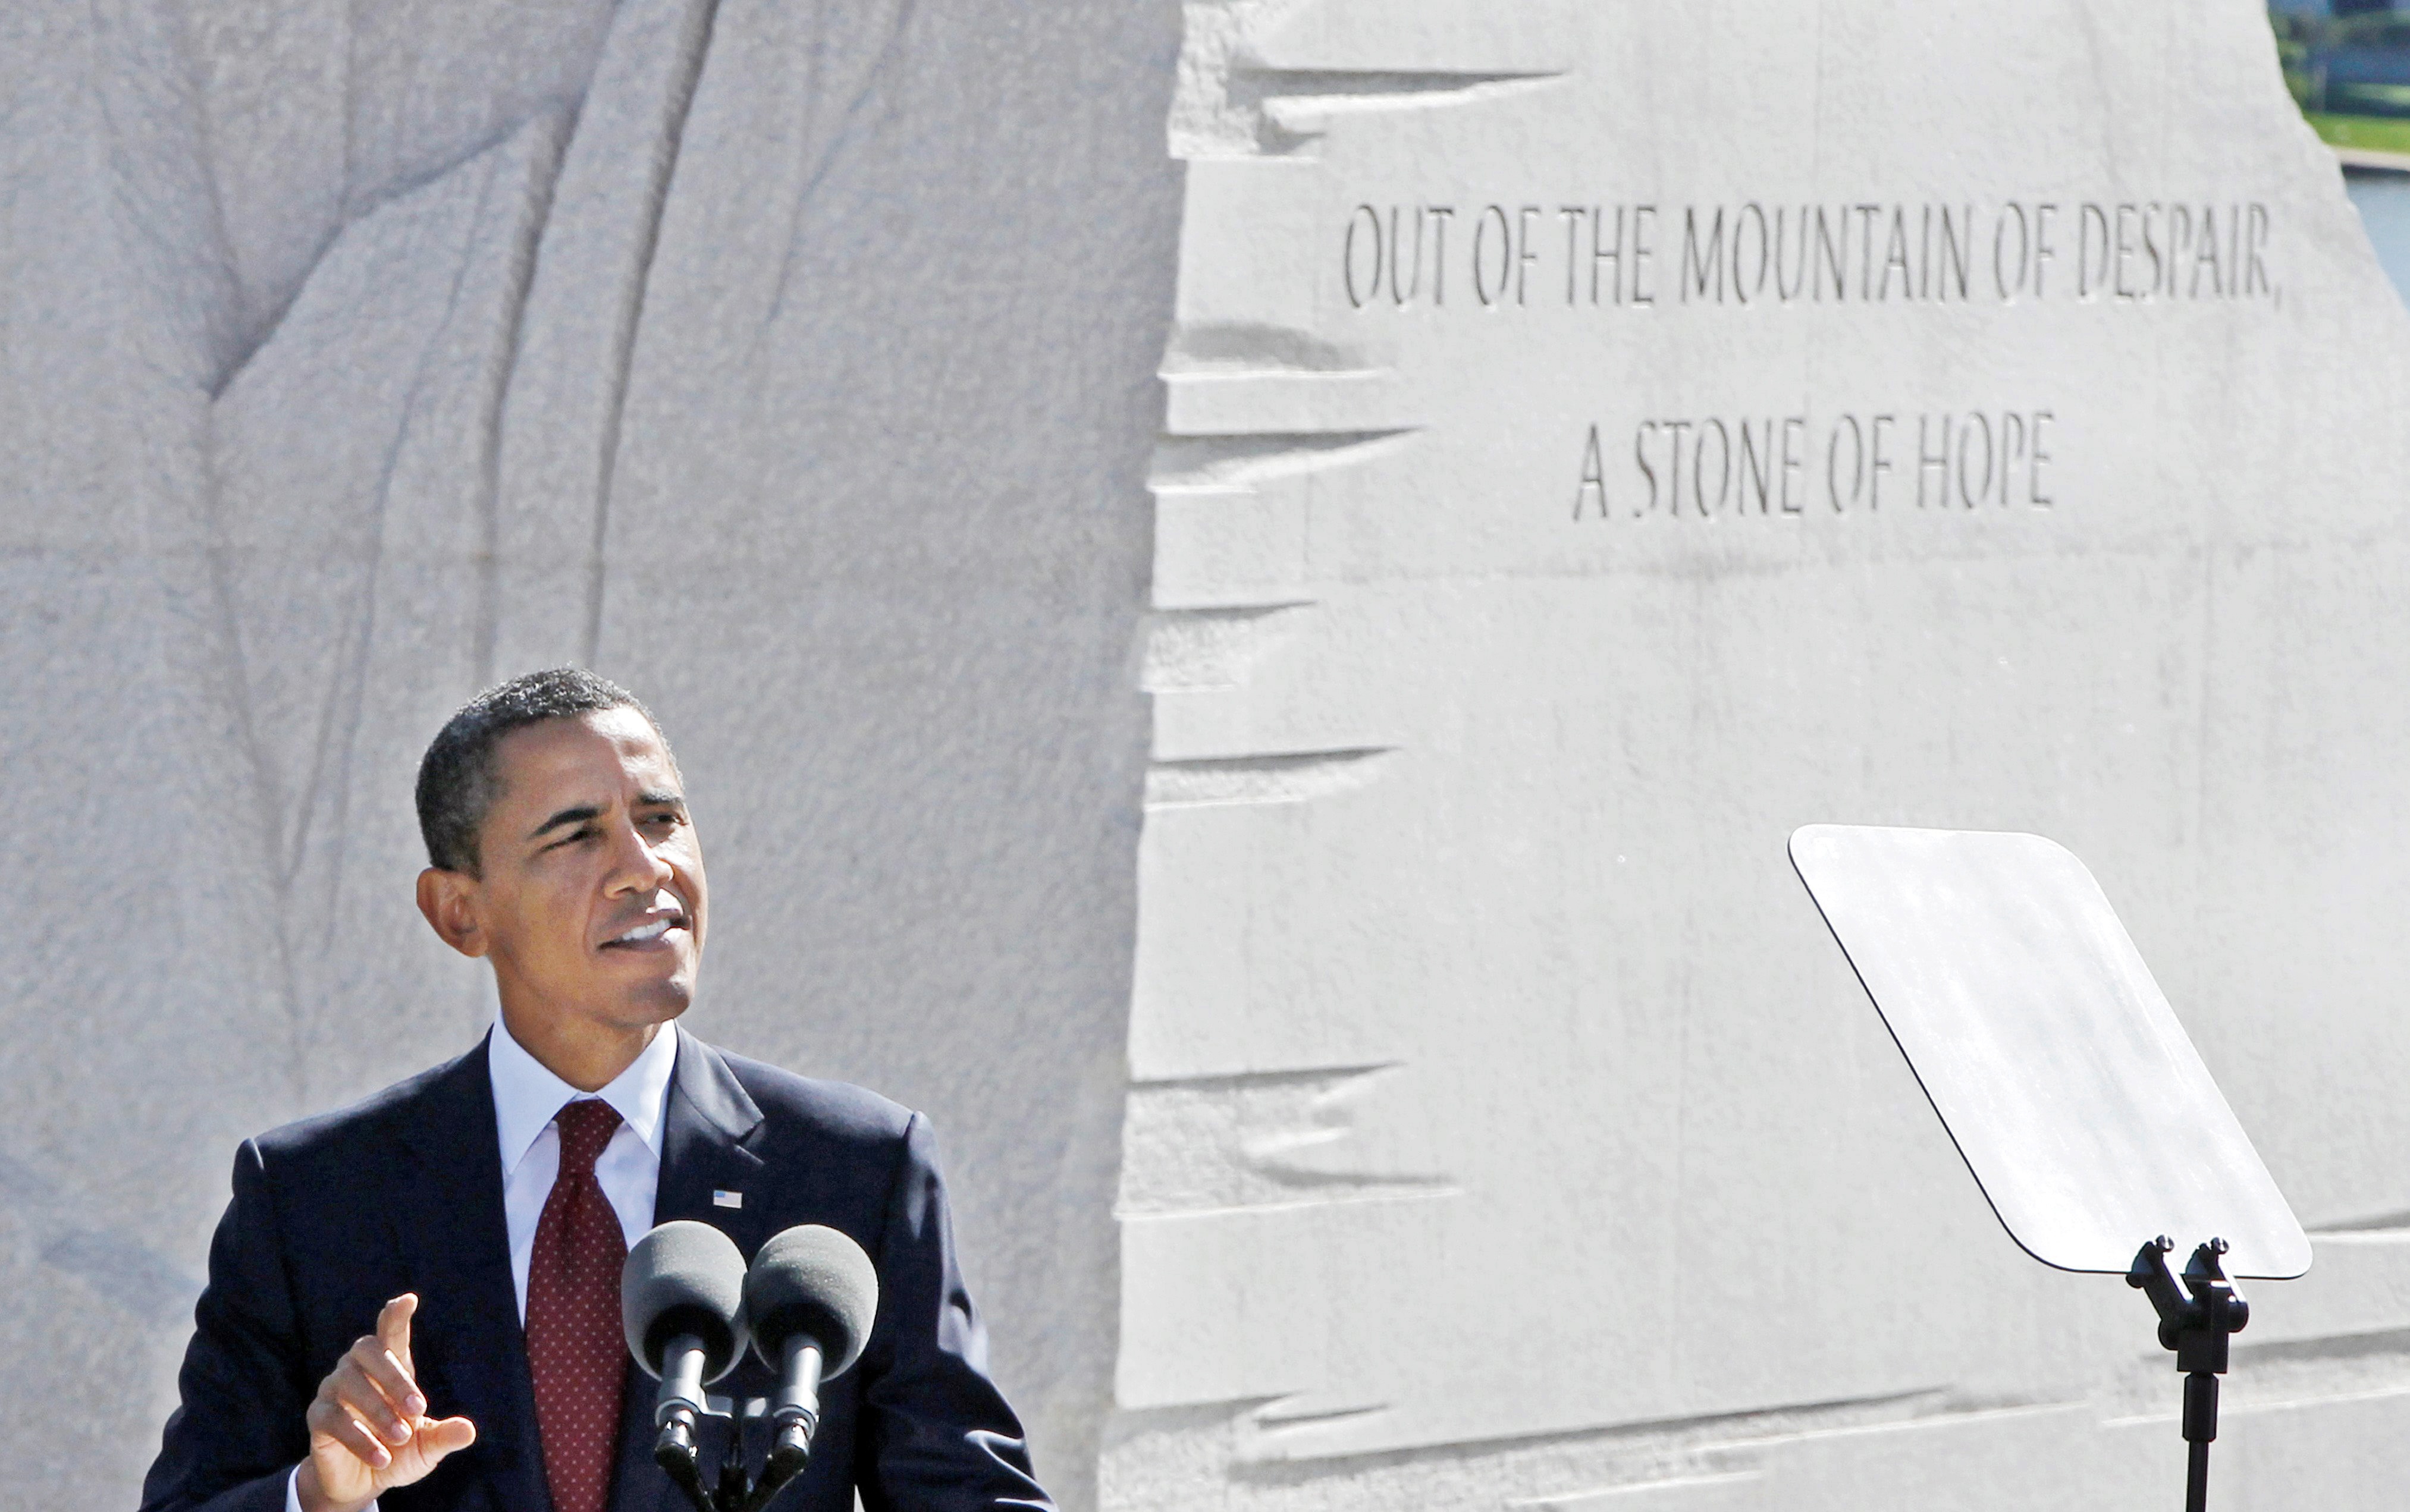 Obama: MLK would have backed 'Occupy' protests - Washington Times